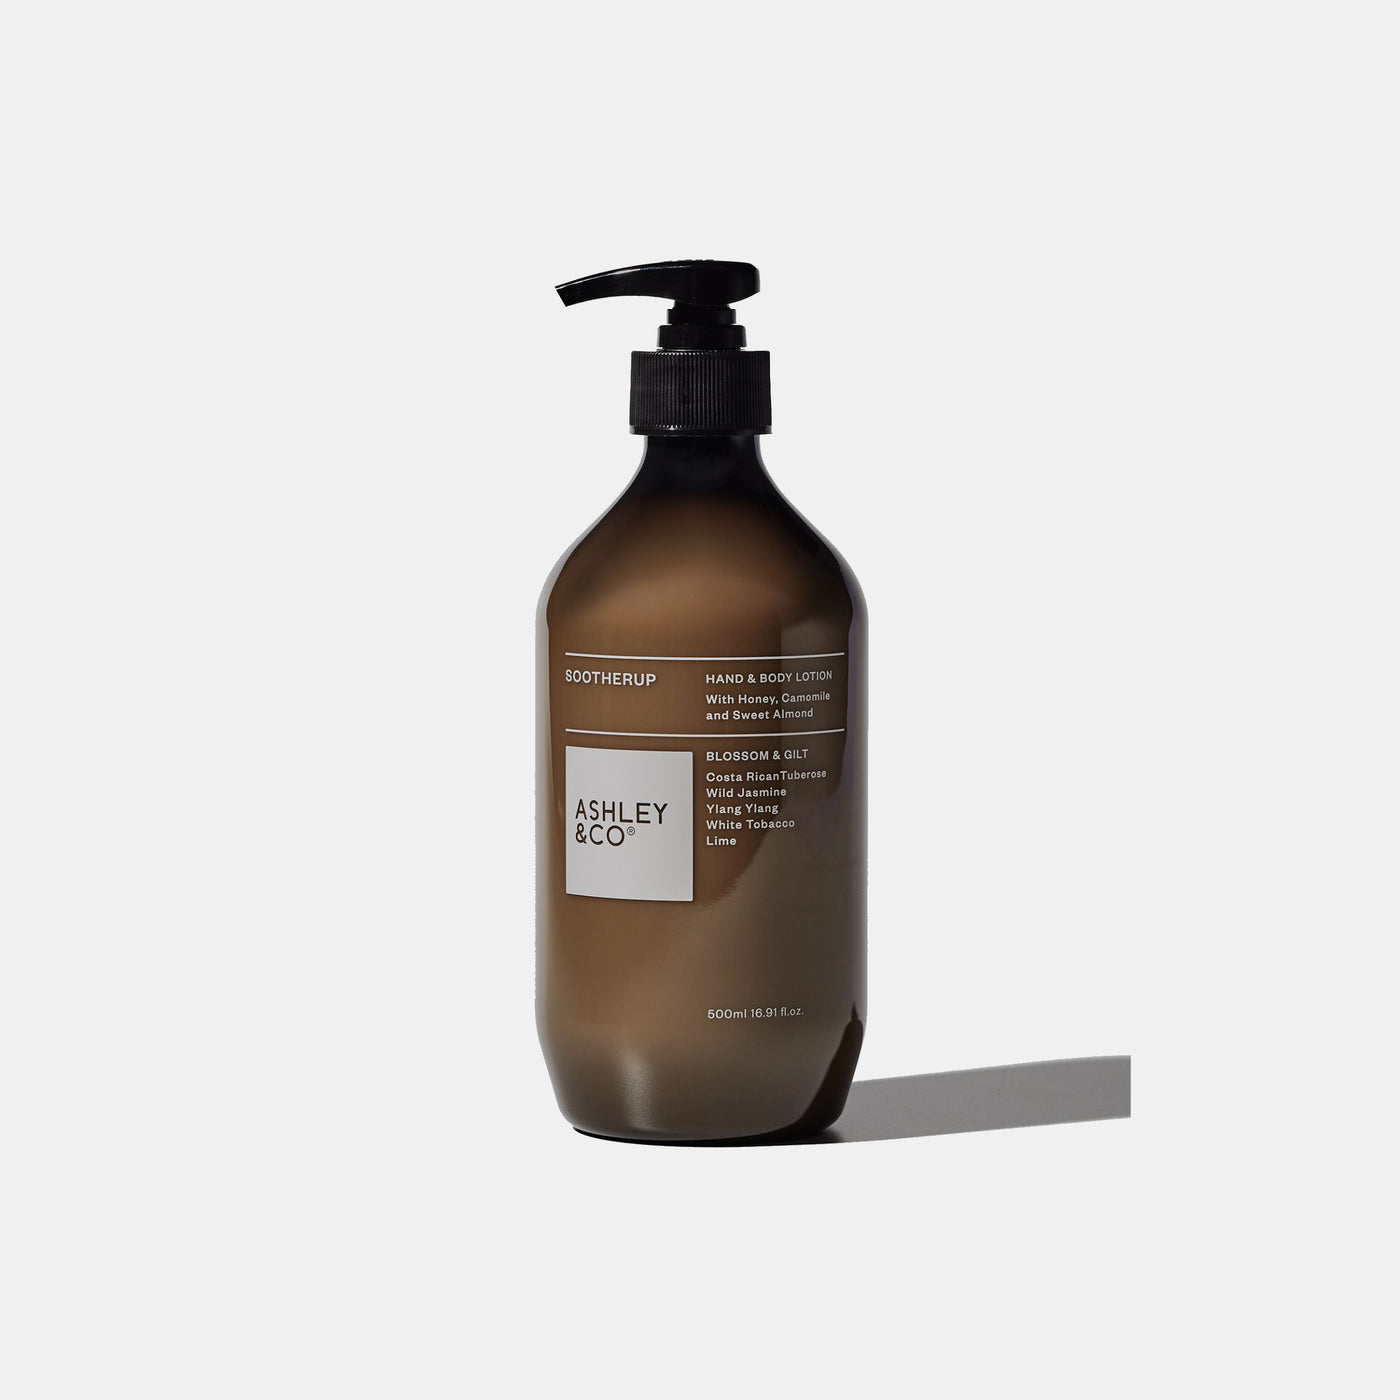 Sootherup - Blossom & Gilt 500ml